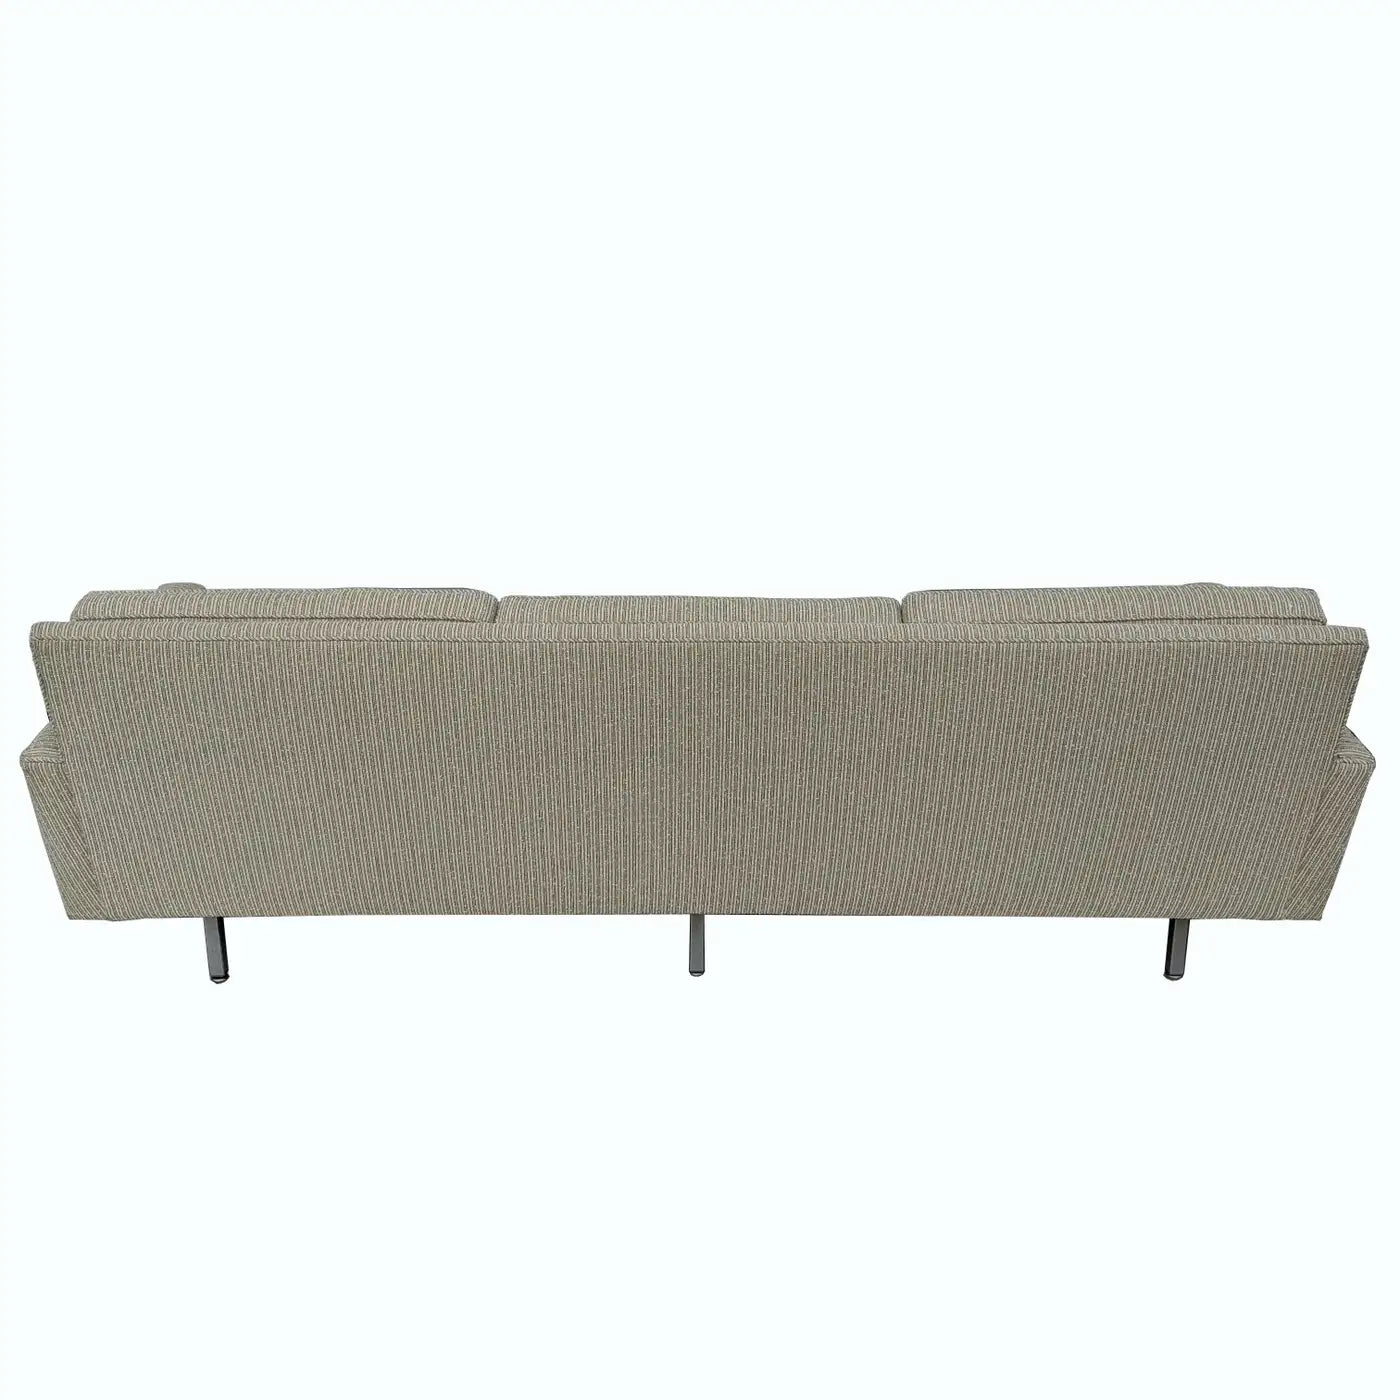 Sofa designed by George Nelson